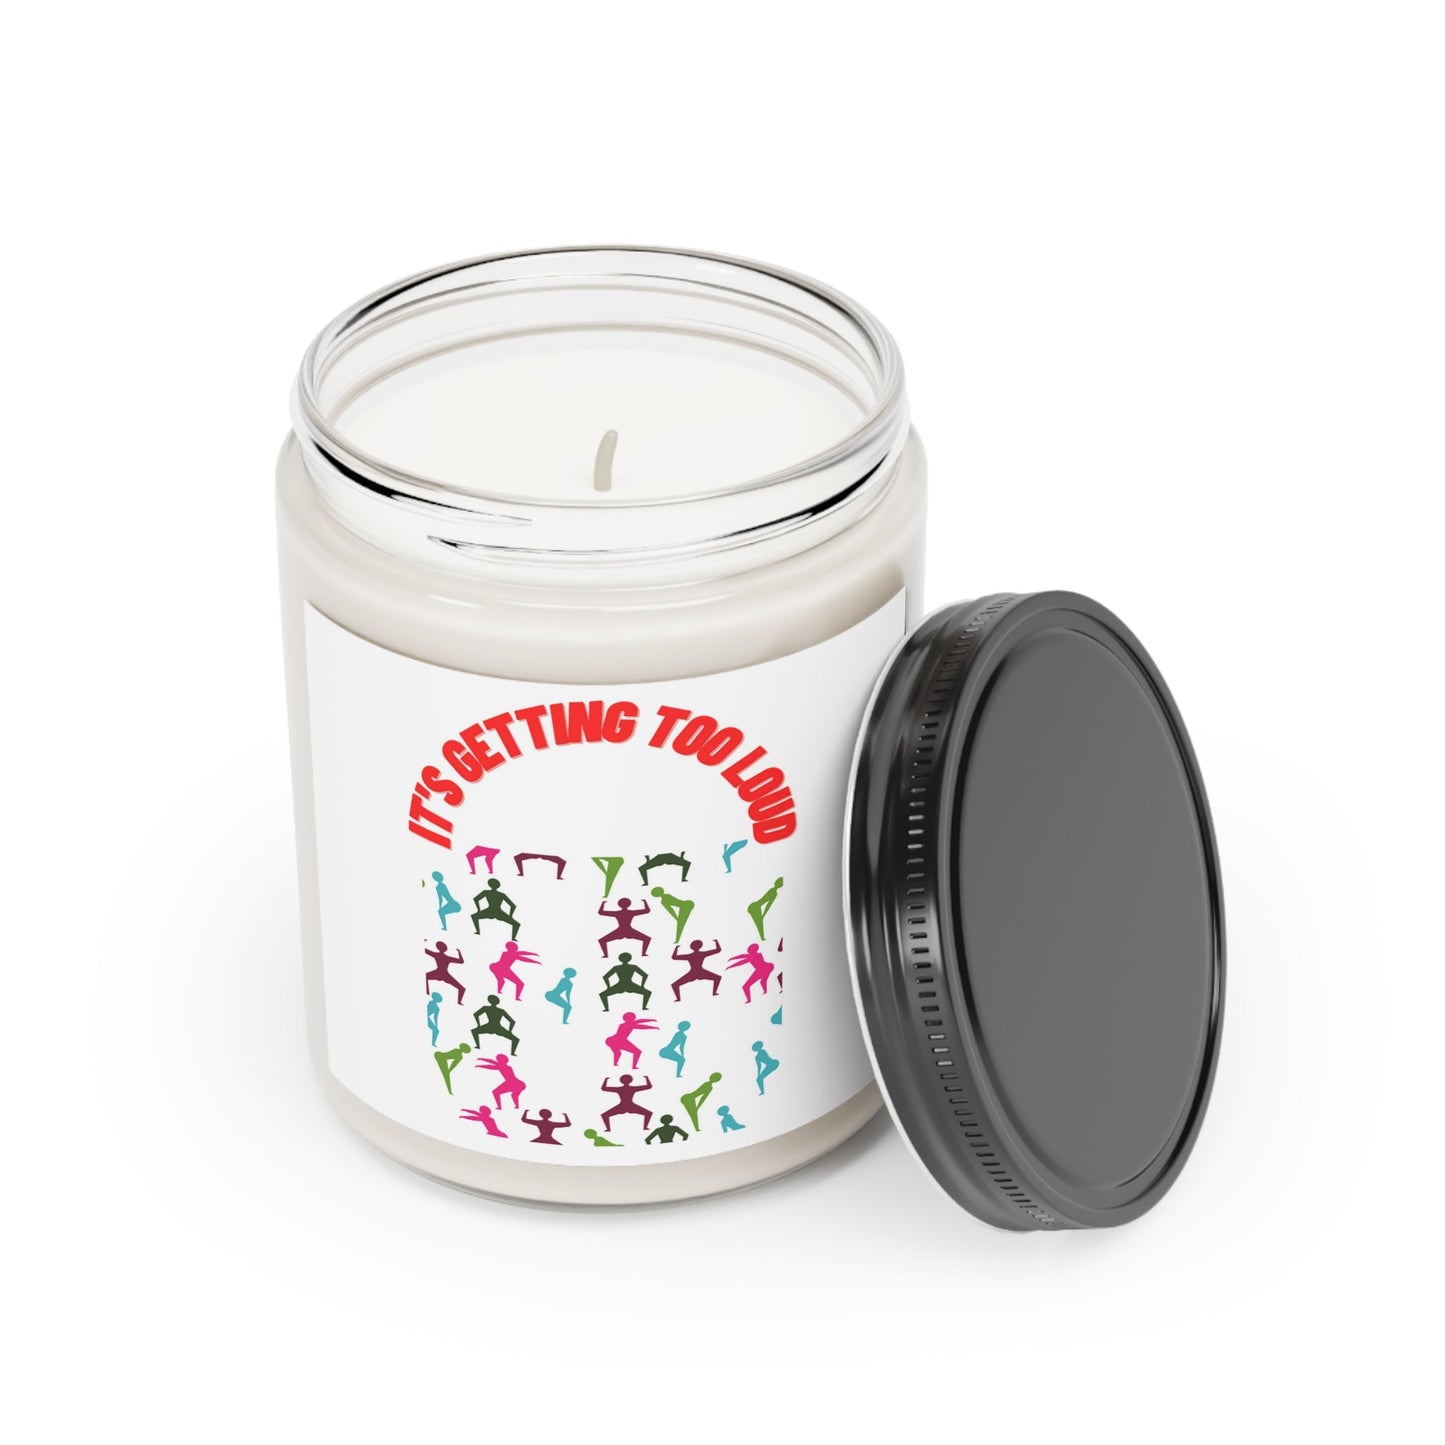 Home Decor - It's Getting Too Loud Scented Candle, 9oz